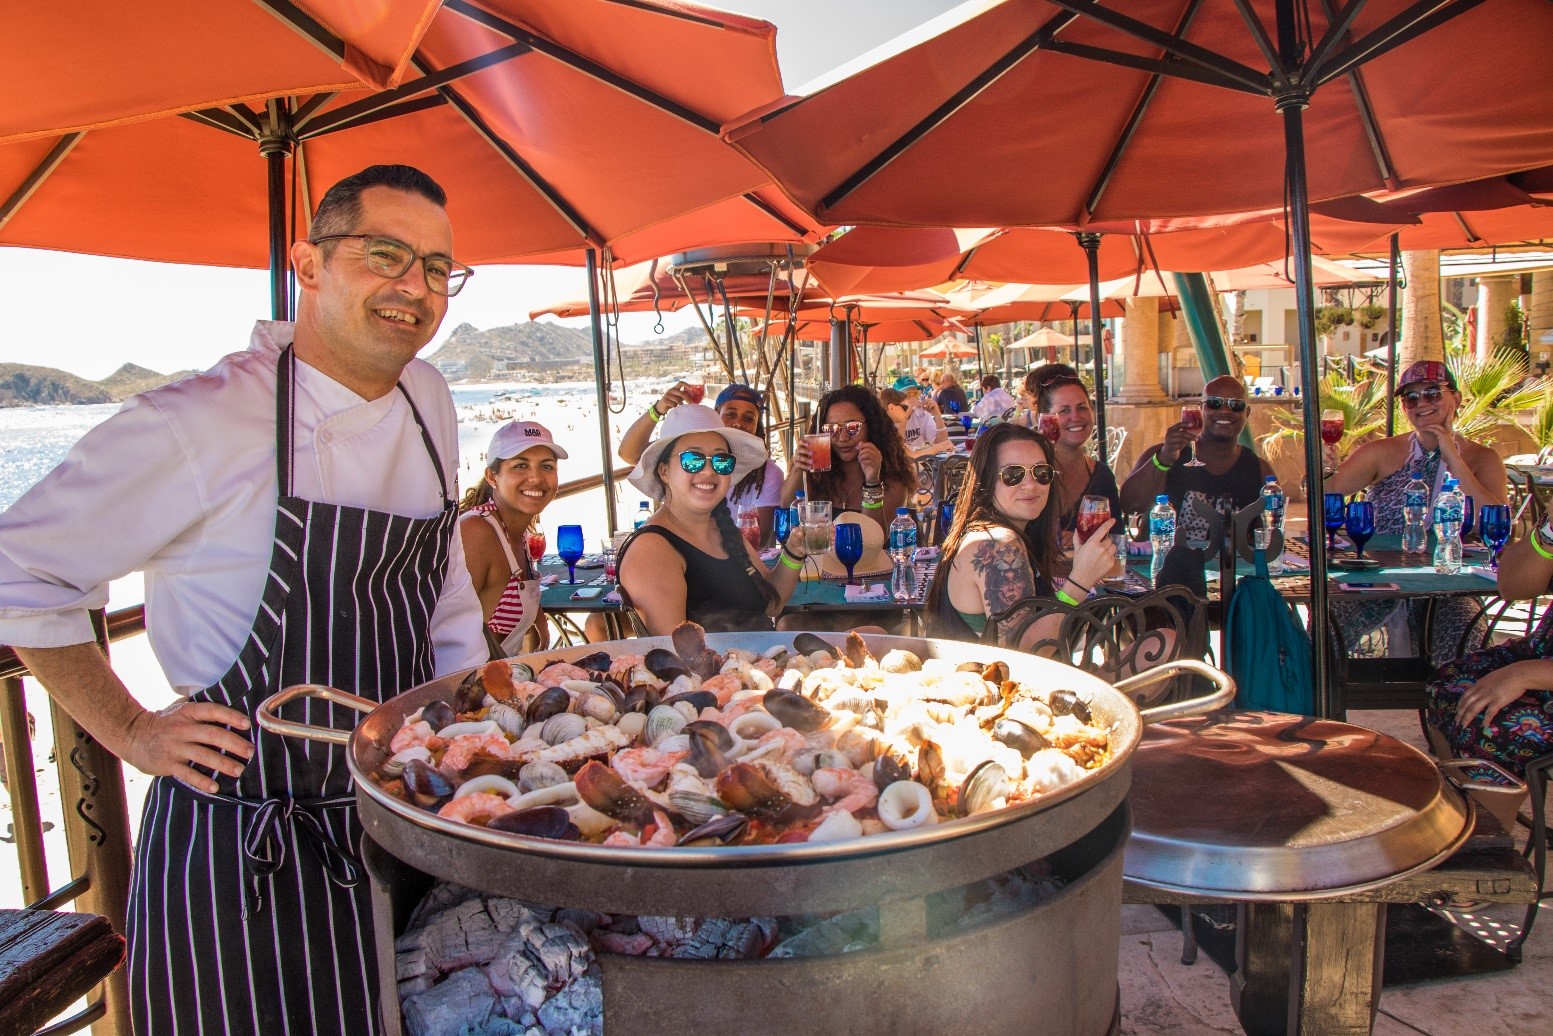 Cabo Resort Update: Mexican Fest Event in September